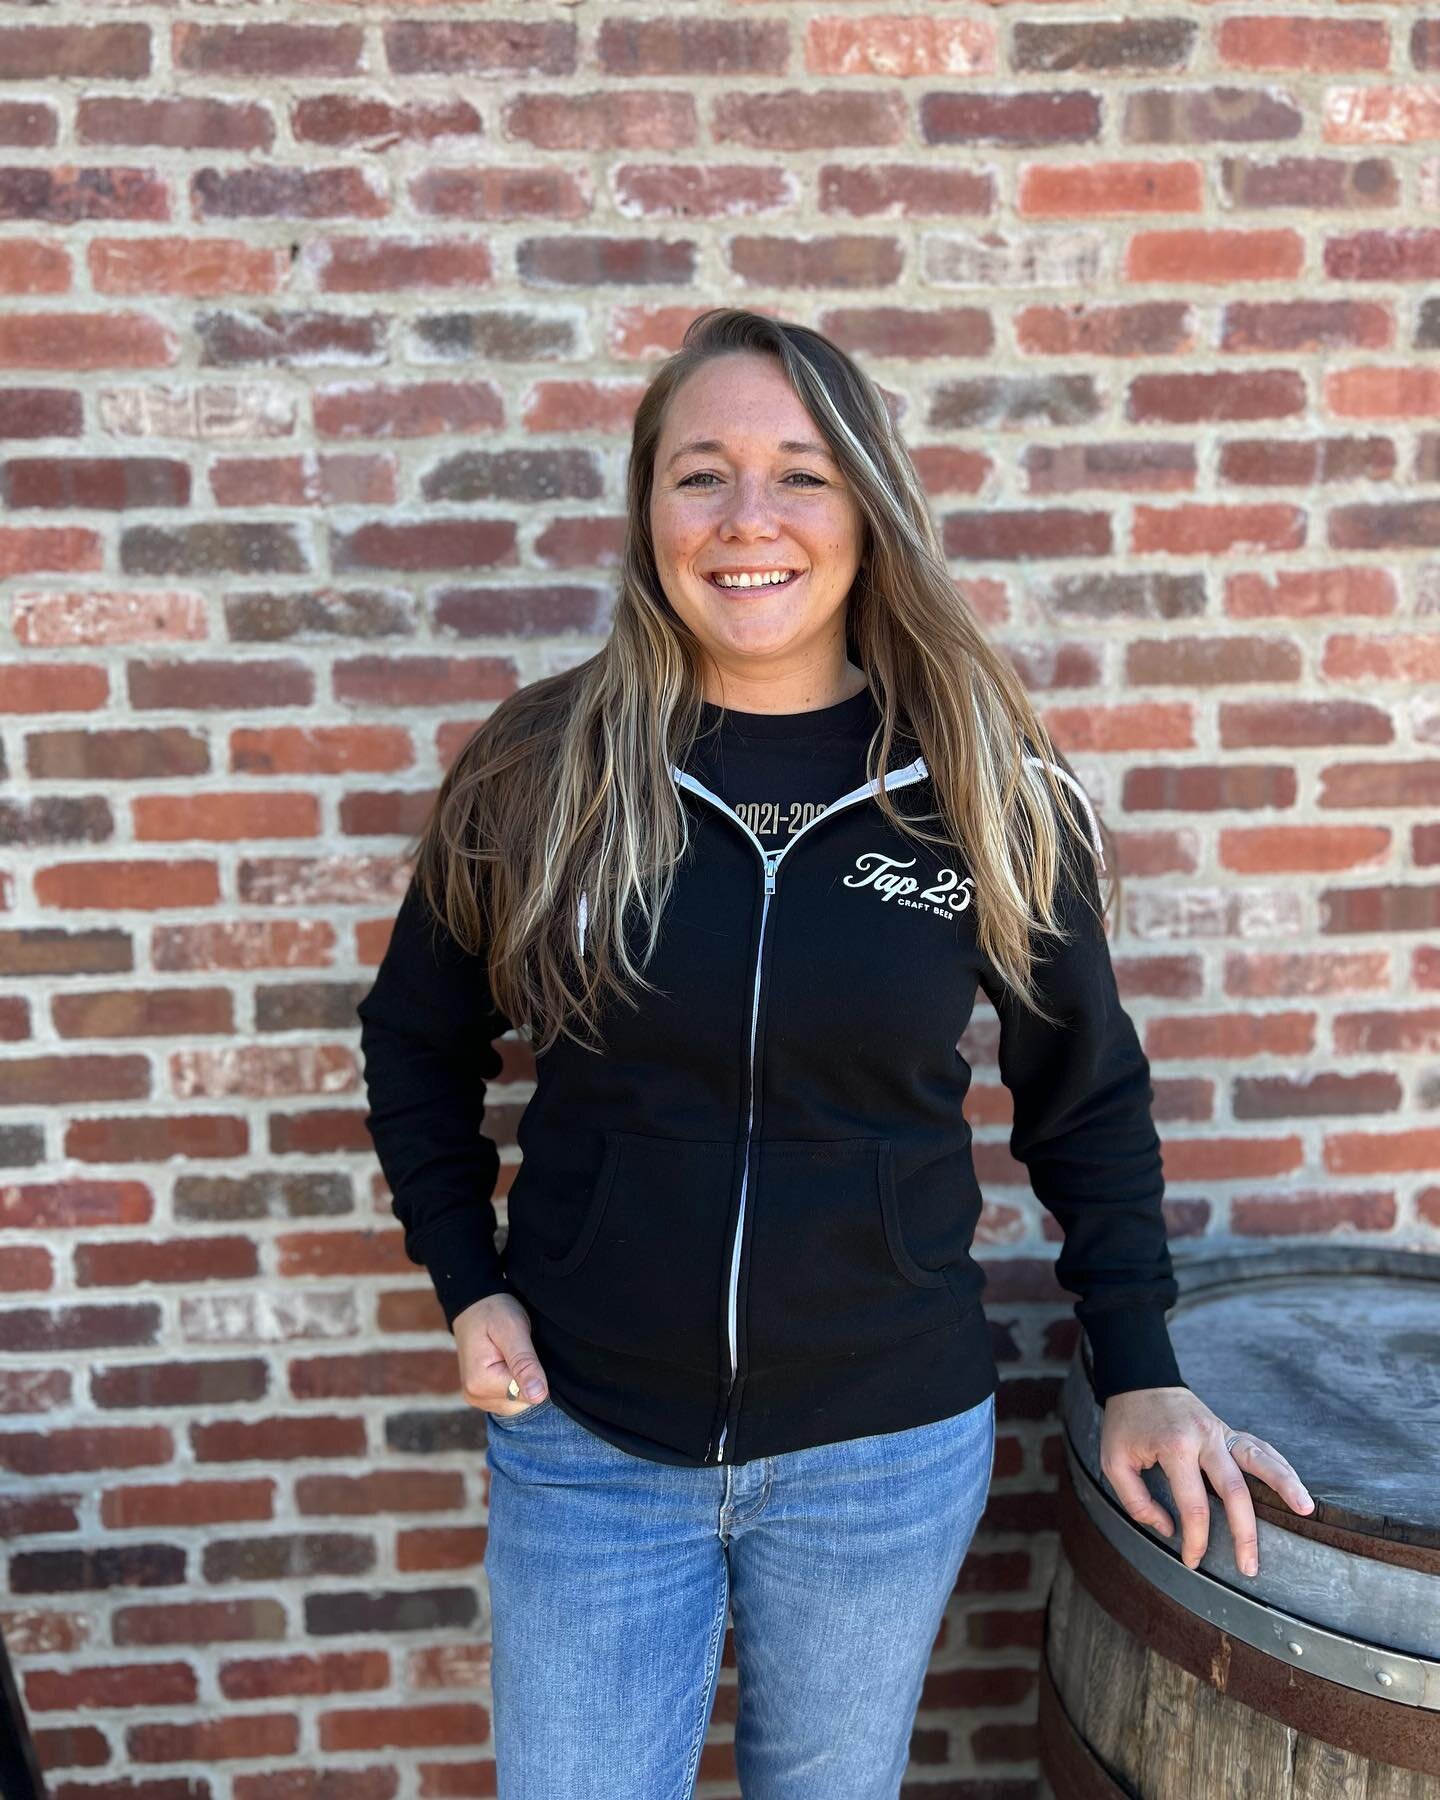 🚨 NEW MERCH ALERT 🚨 
Black Zipper Hoodies &amp; Black Pullover Hoodies now available for purchase in the taproom!